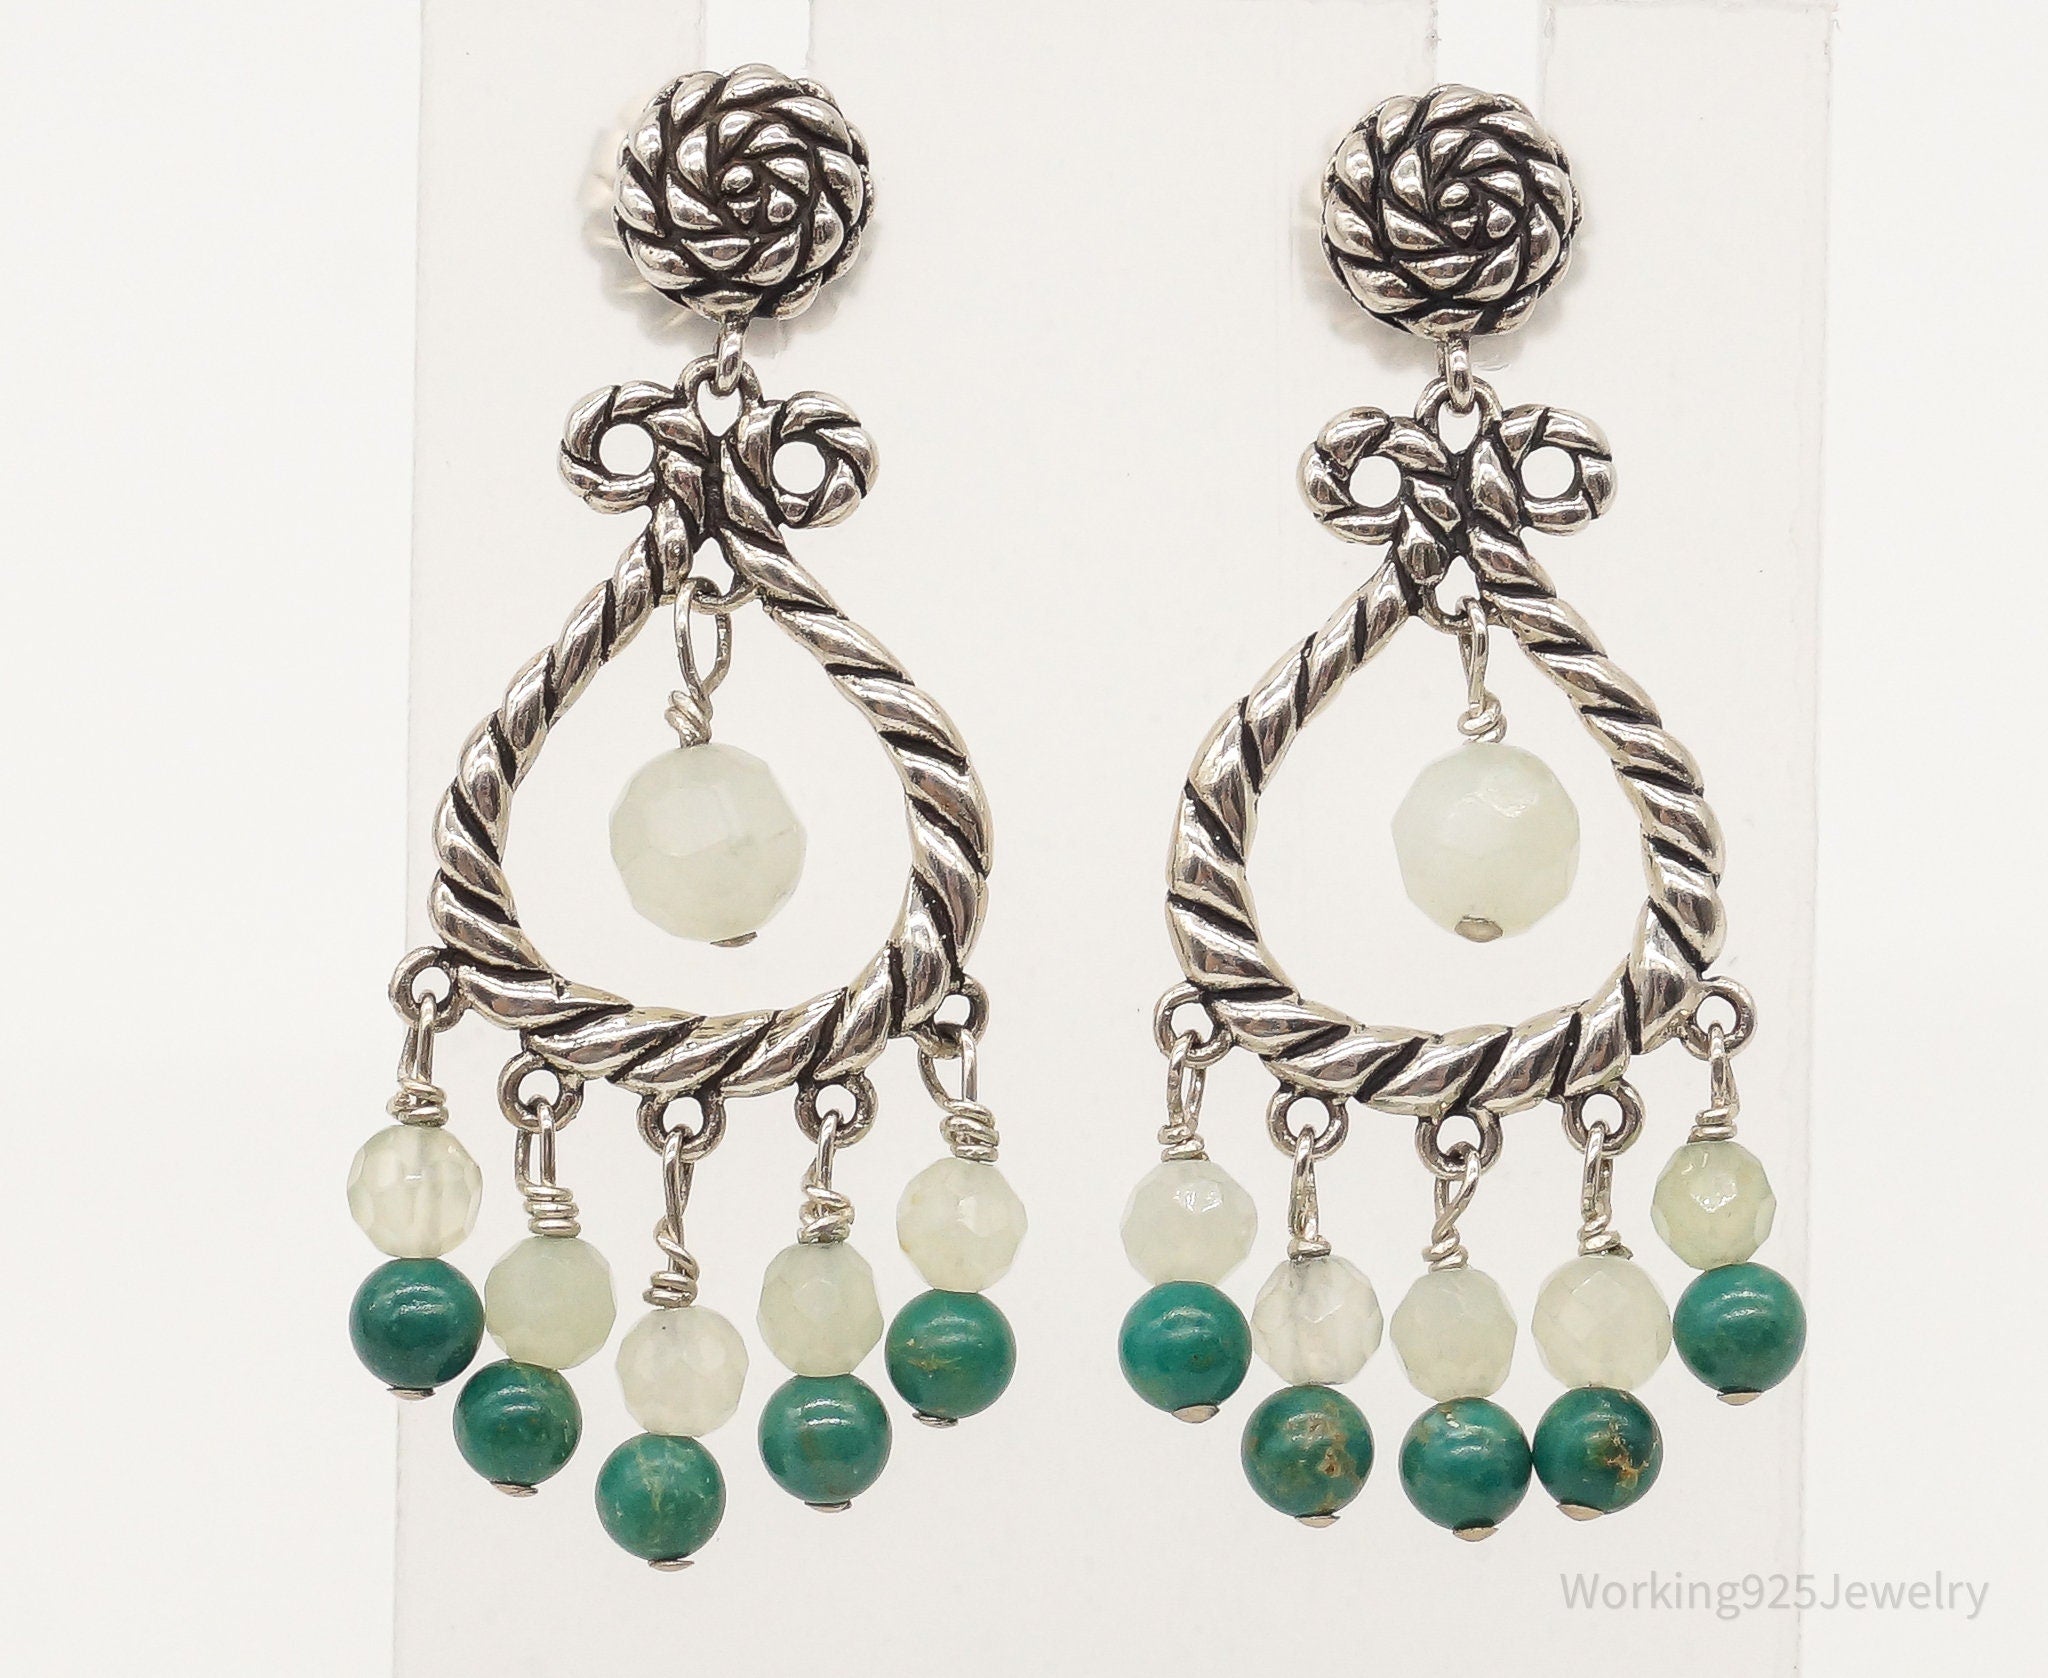 Western Carolyn Pollack Relios Green Quartz Turquoise Sterling Silver Earrings